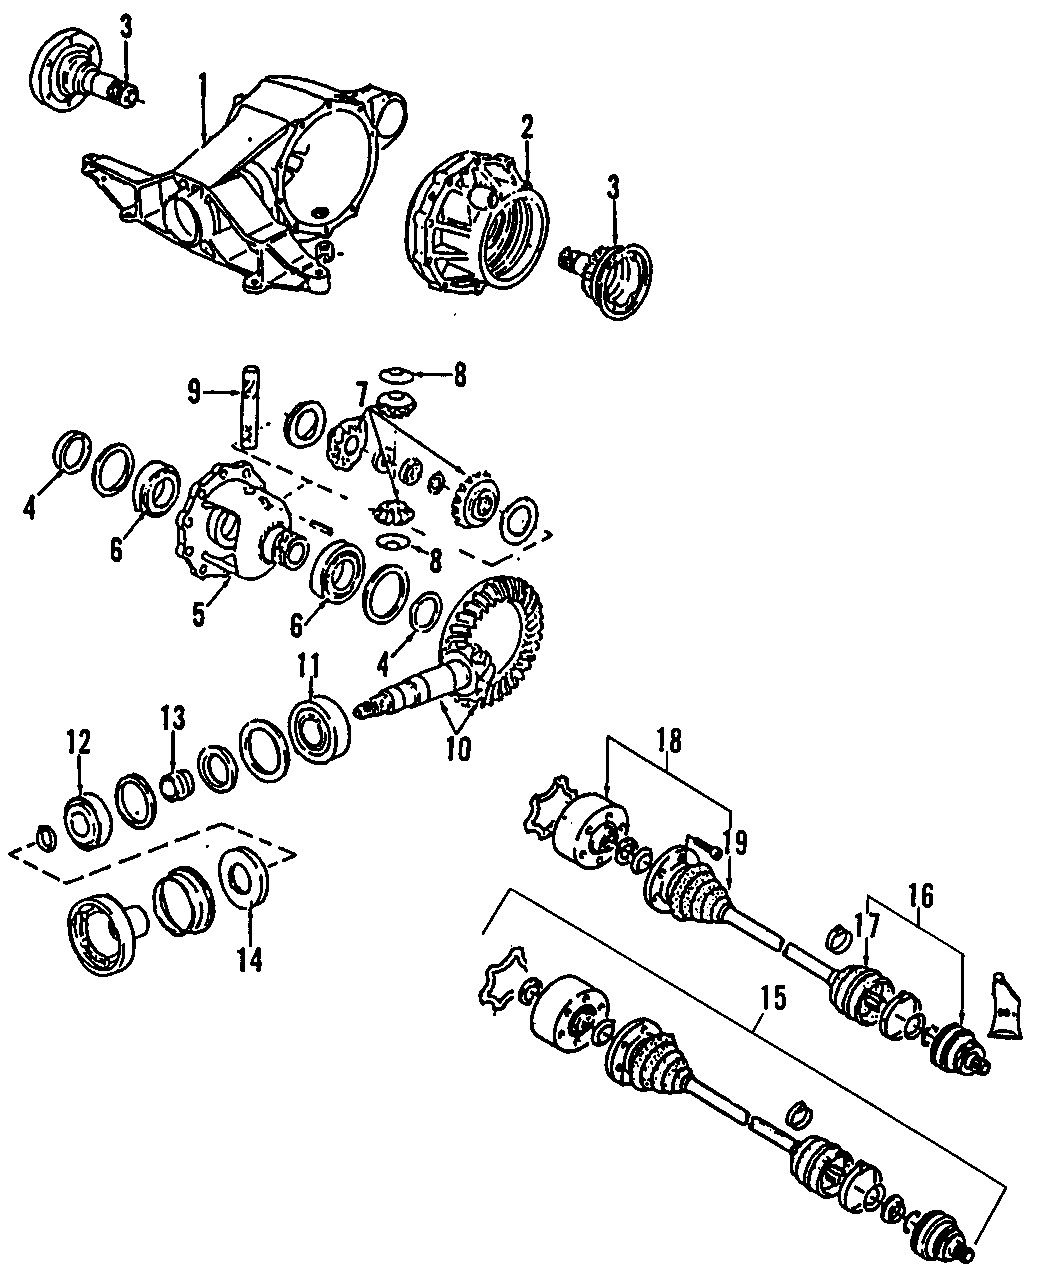 DRIVE AXLES. REAR AXLE. AXLE SHAFTS & JOINTS. DIFFERENTIAL. PROPELLER SHAFT.https://images.simplepart.com/images/parts/motor/fullsize/F205080.png